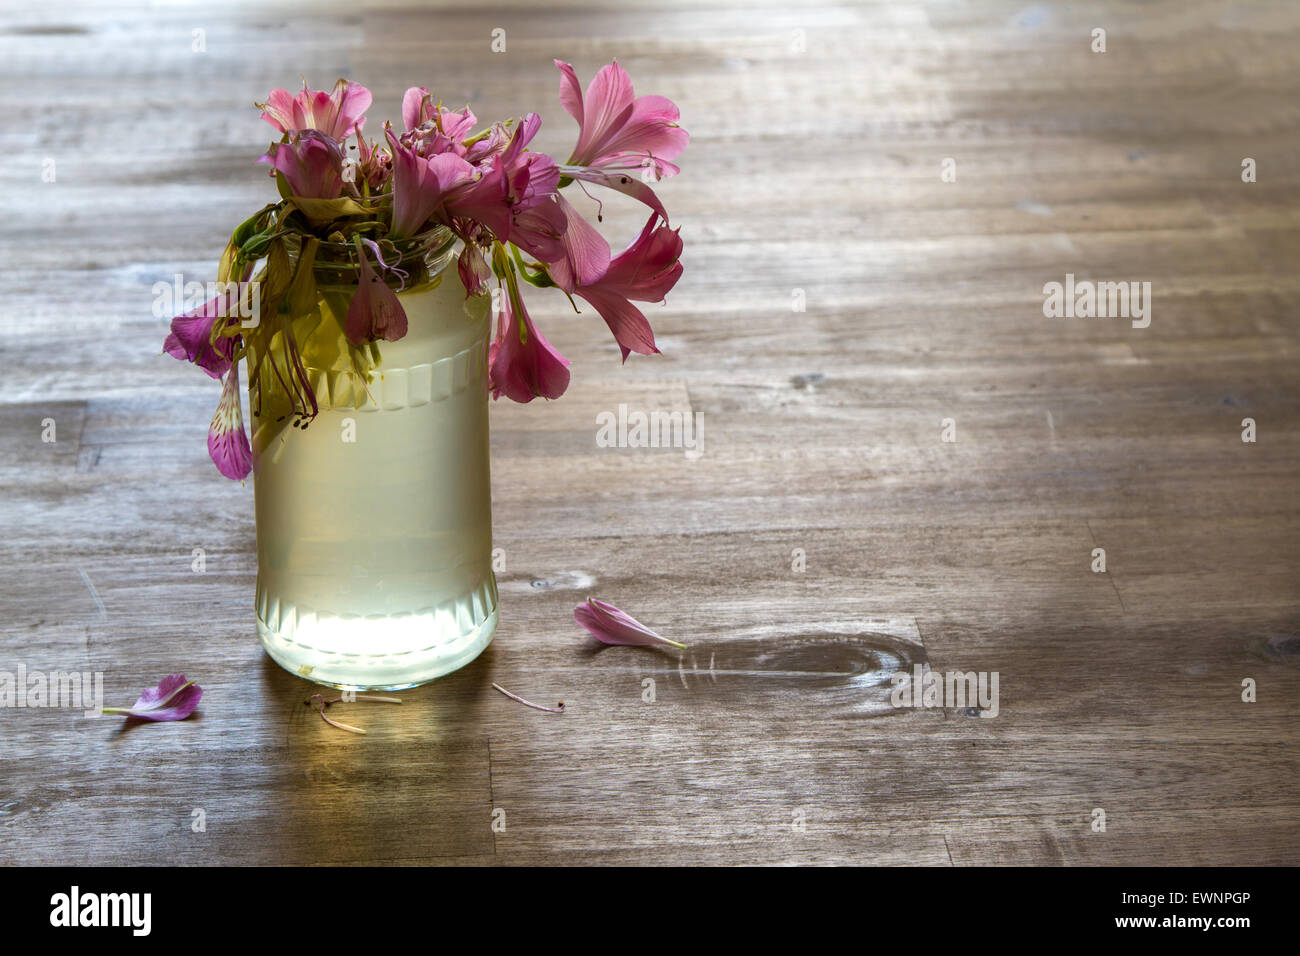 Melancholic scene of a jar with flowers Stock Photo